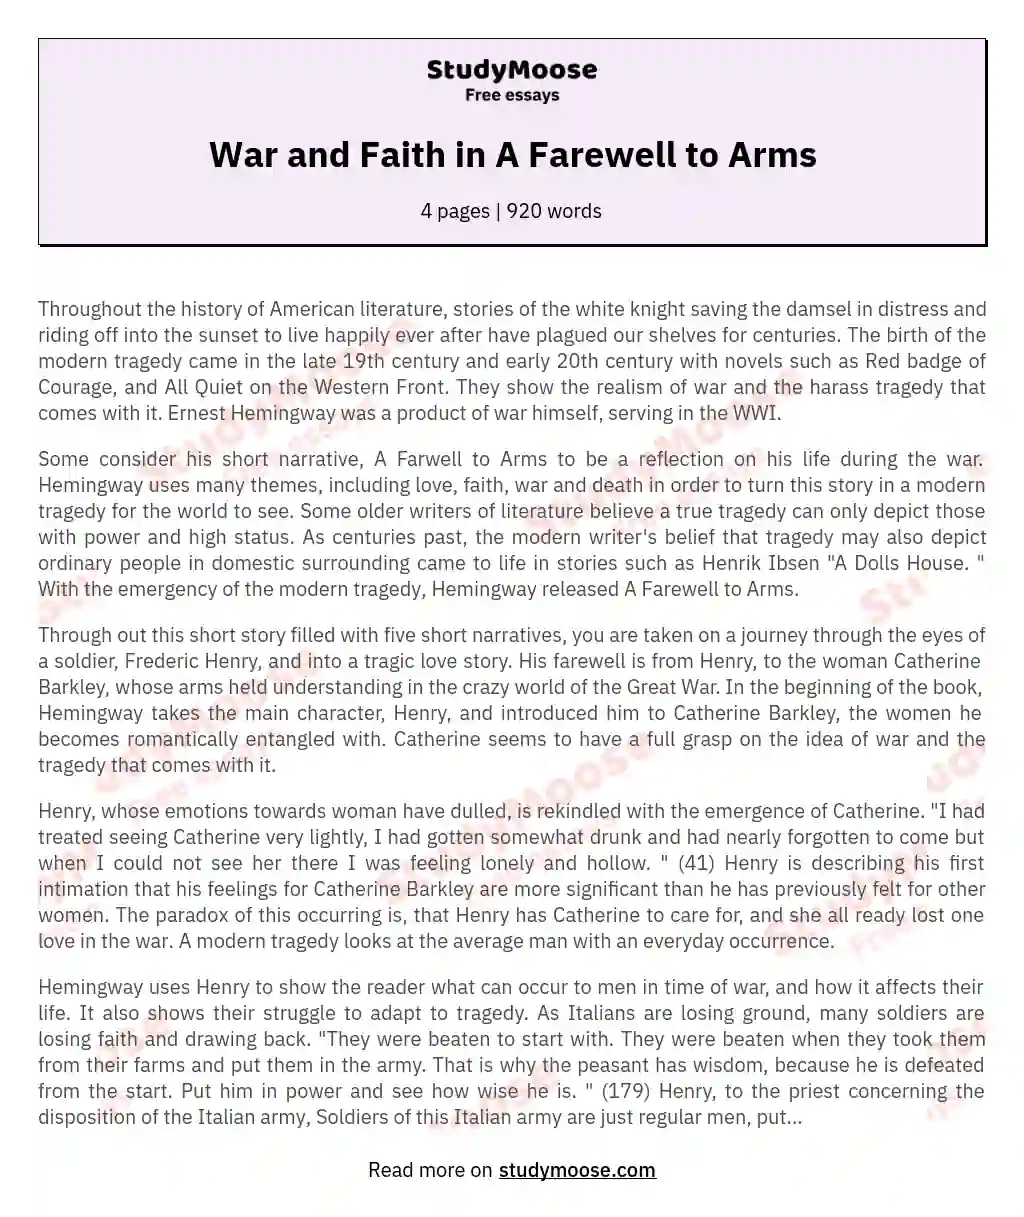 War and Faith in A Farewell to Arms